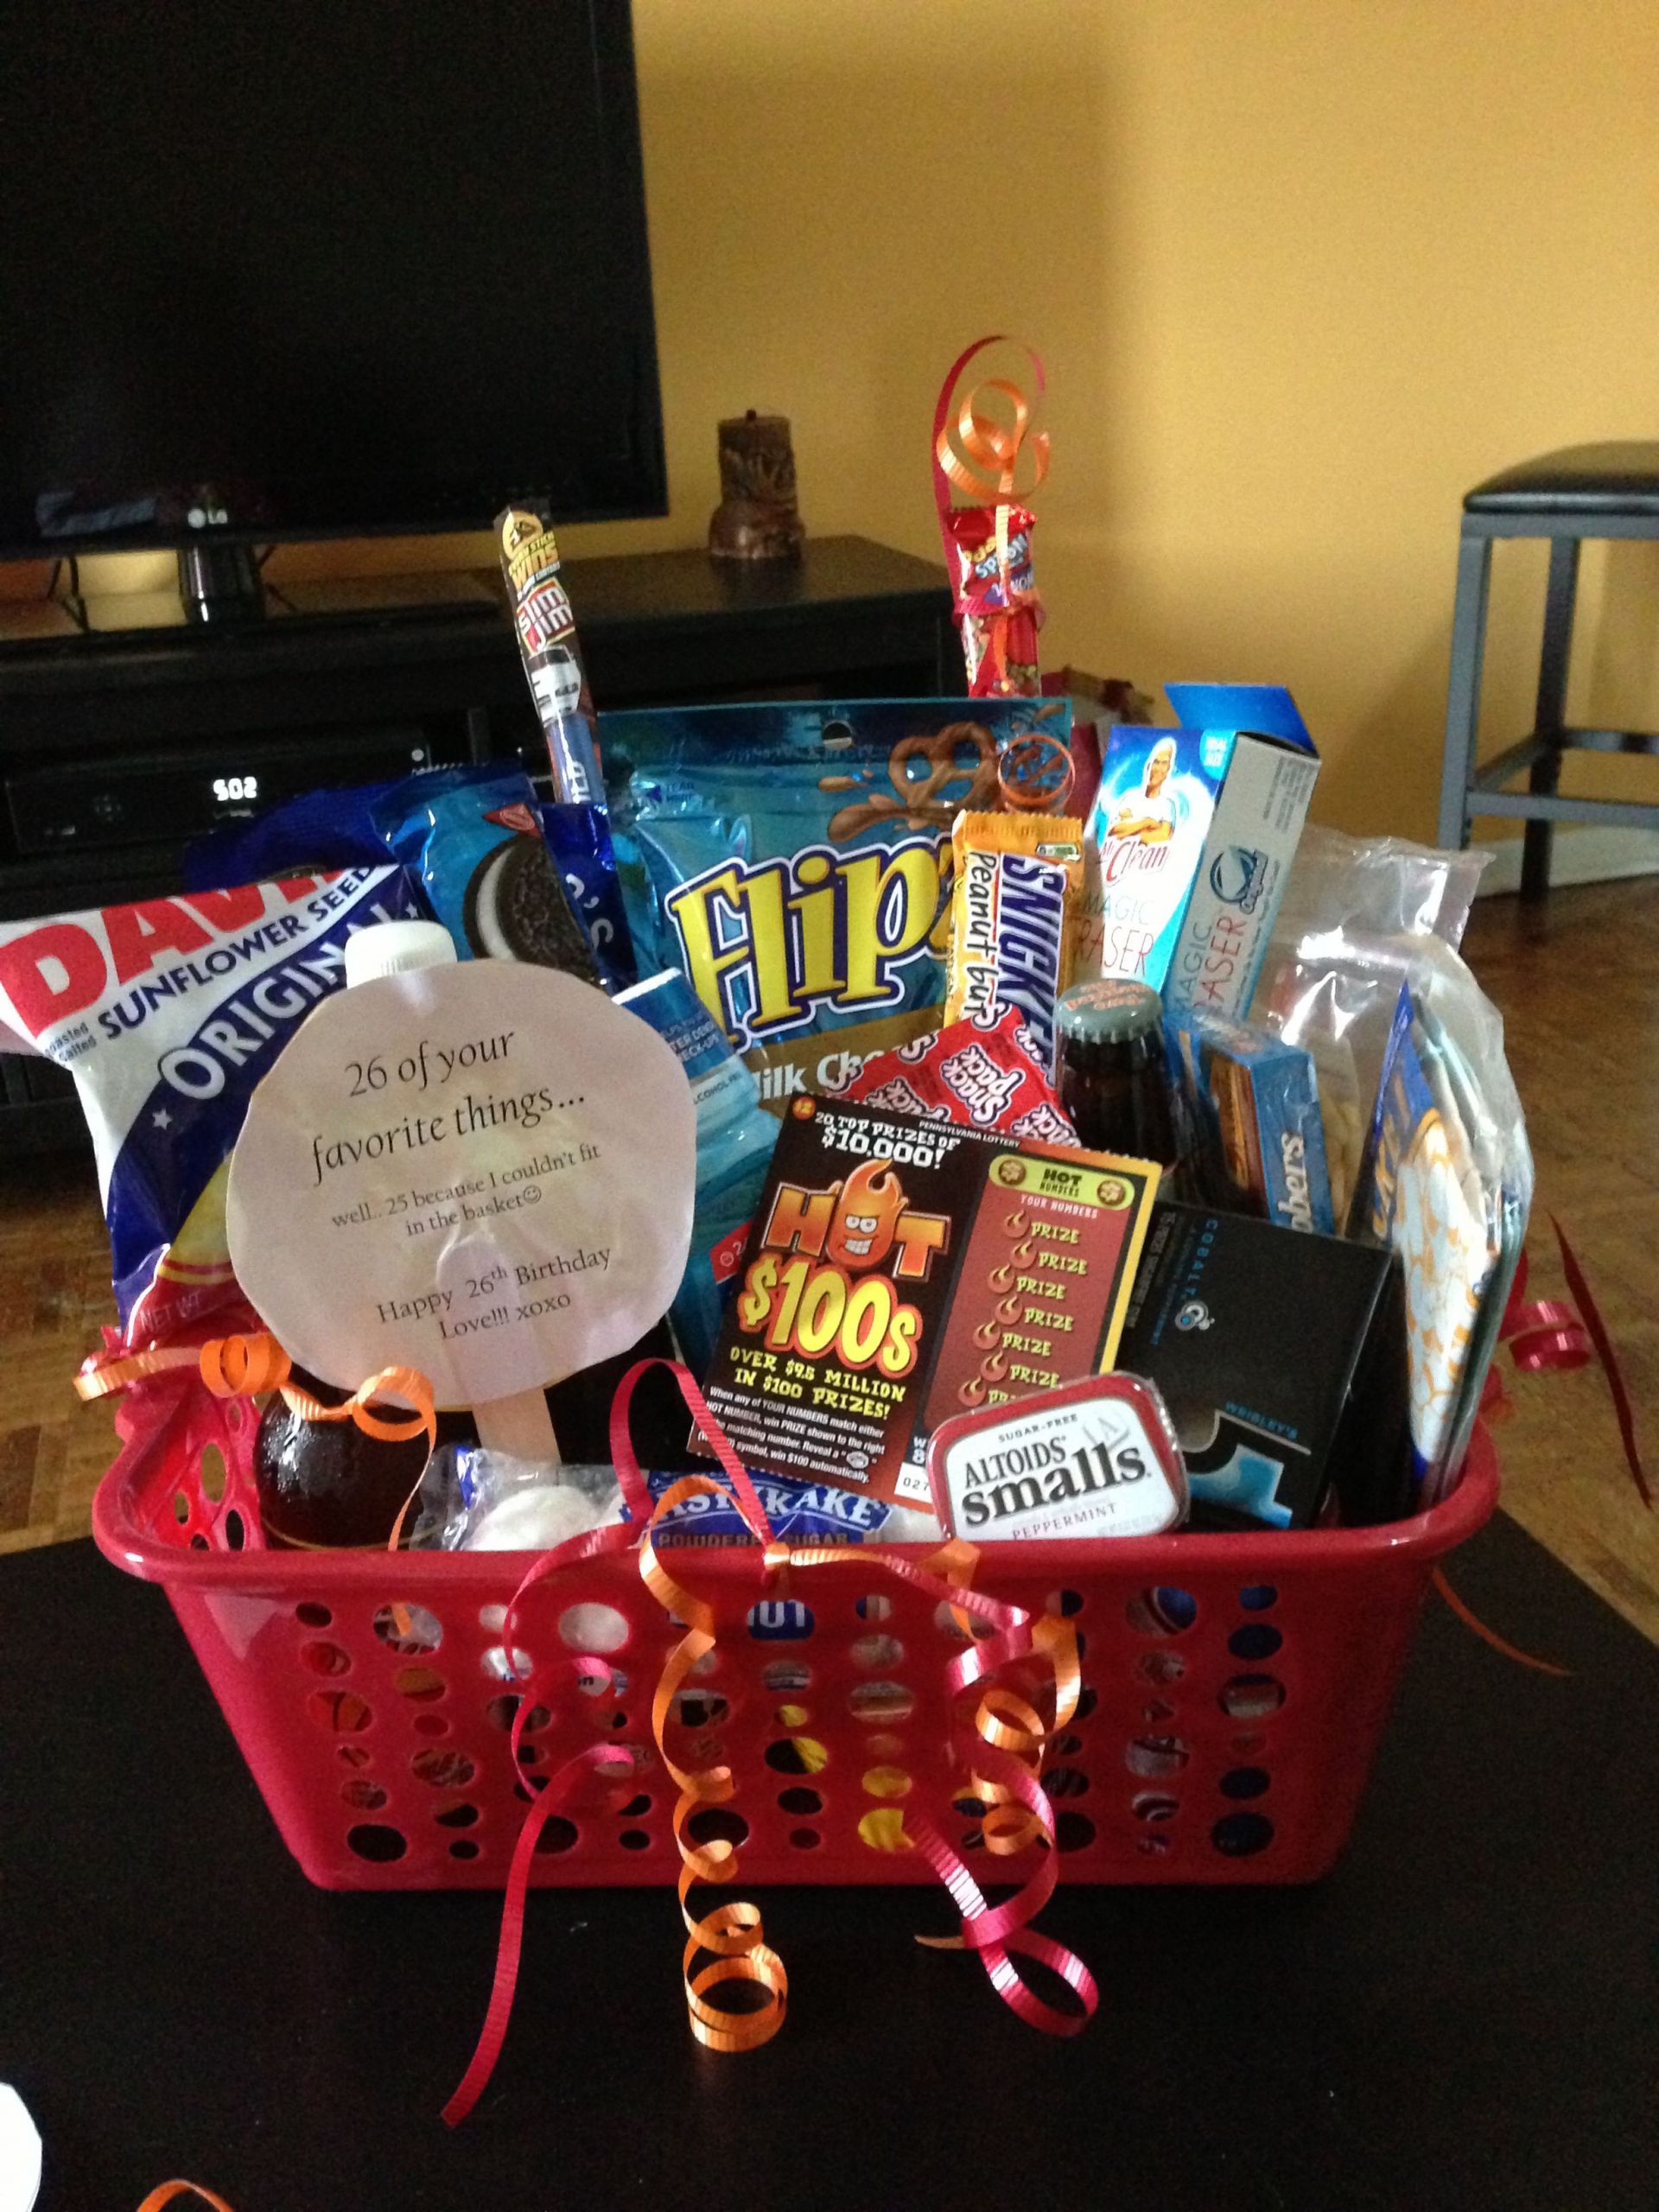 Birthday Gift Delivery For Him
 Boyfriend birthday basket 26 of his favorite things for